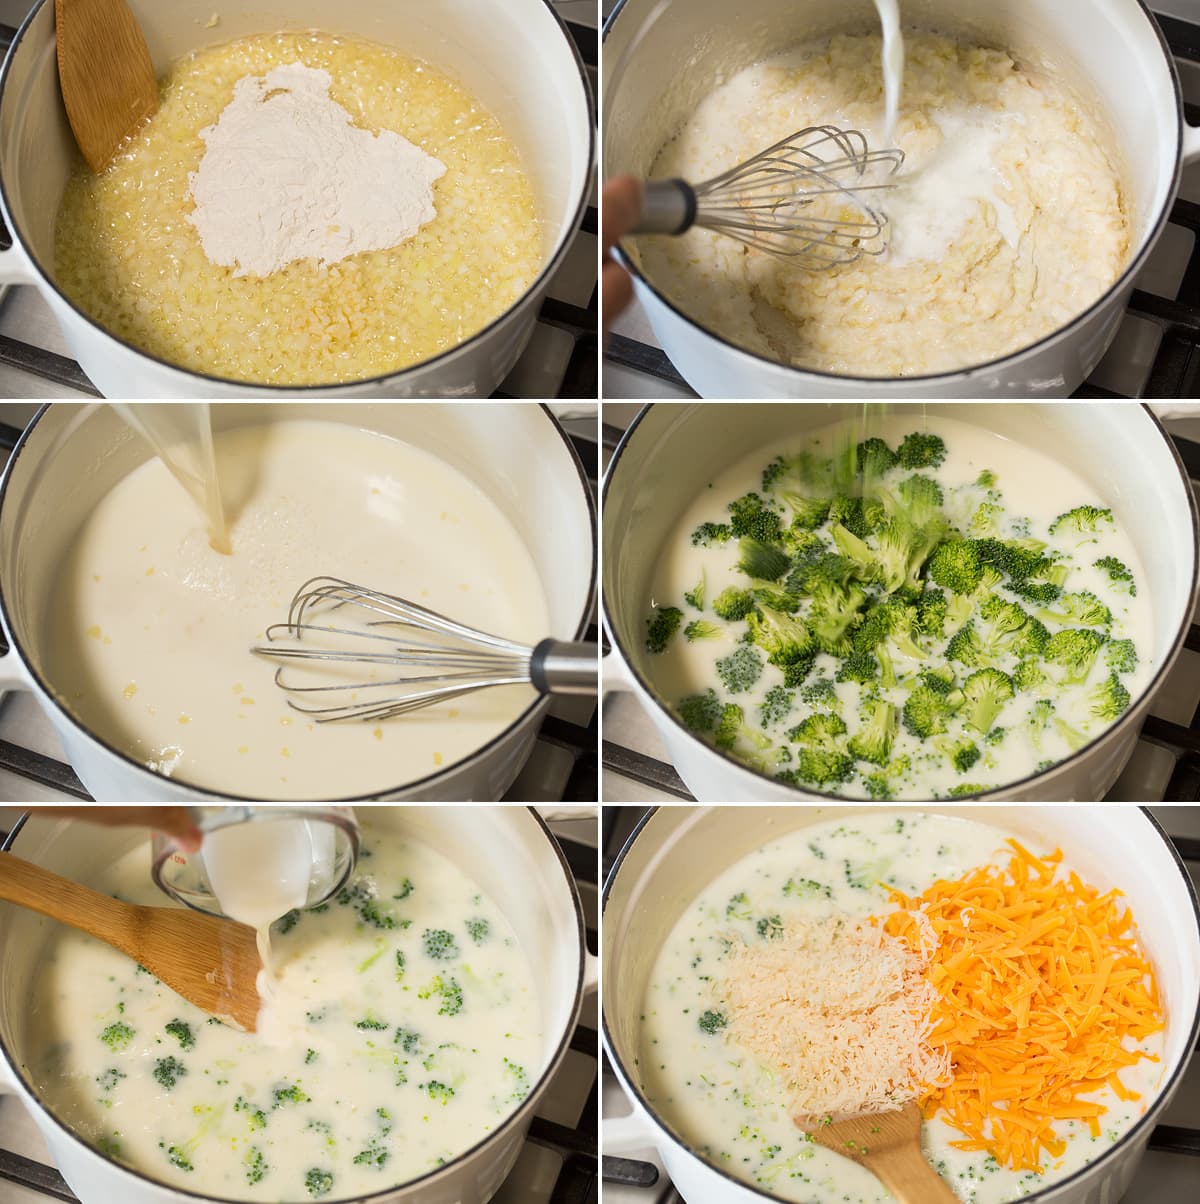 Collage of six images showing steps of making broccoli cheese soup. Shows making roux and bachamel sauce, adding broccoli and cooking, mixing in cream and finishing with shredded cheeses.